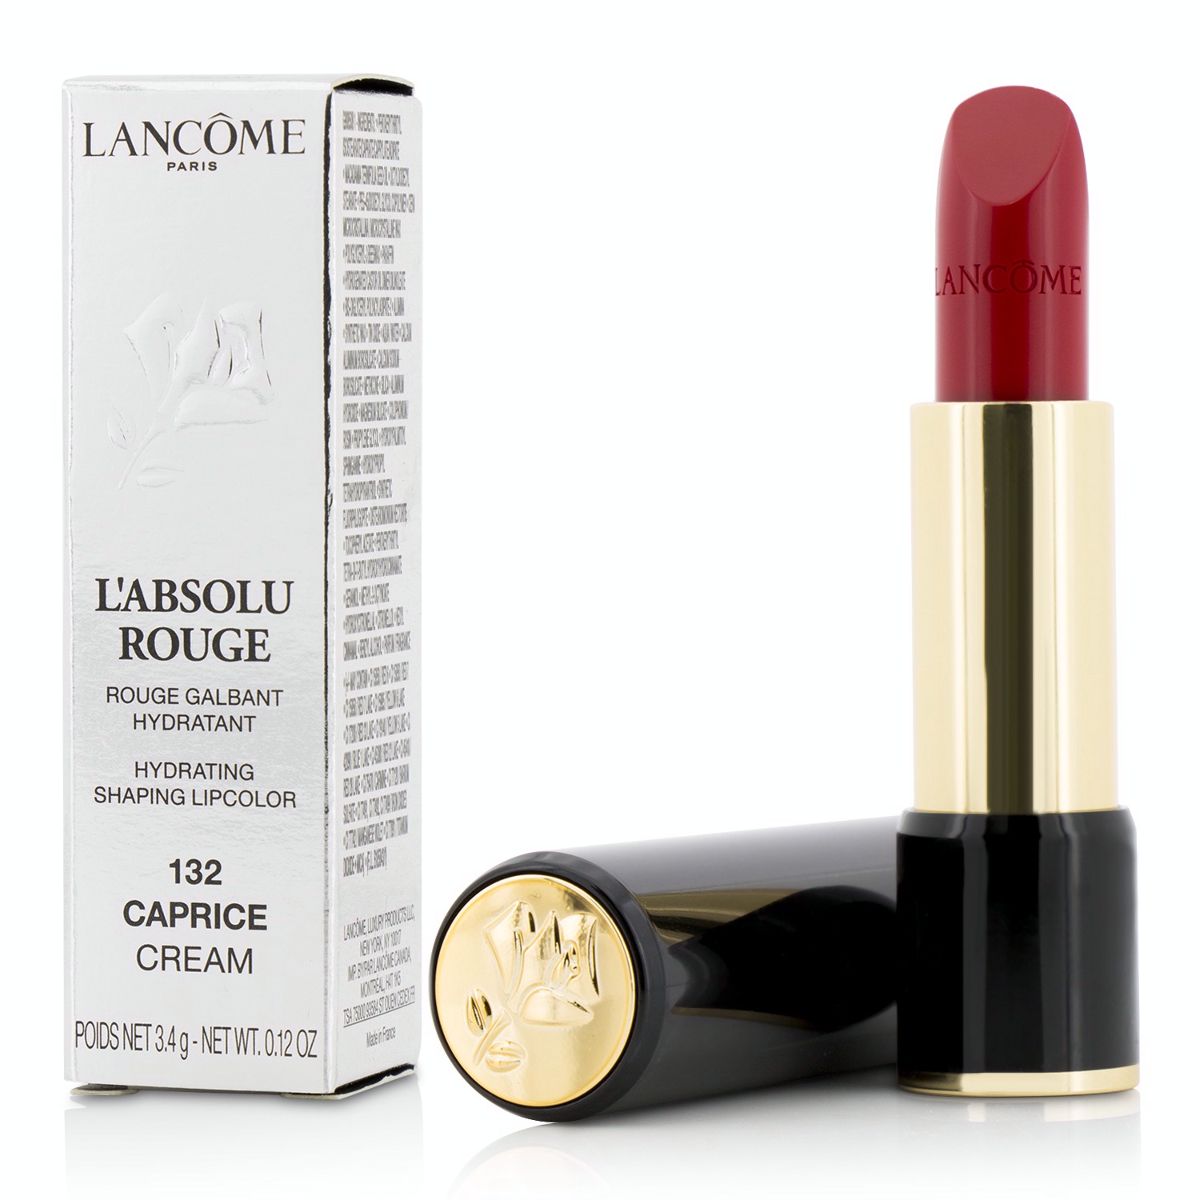 L Absolu Rouge Hydrating Shaping Lipcolor - # 132 Caprice (Cream) Lancome Image